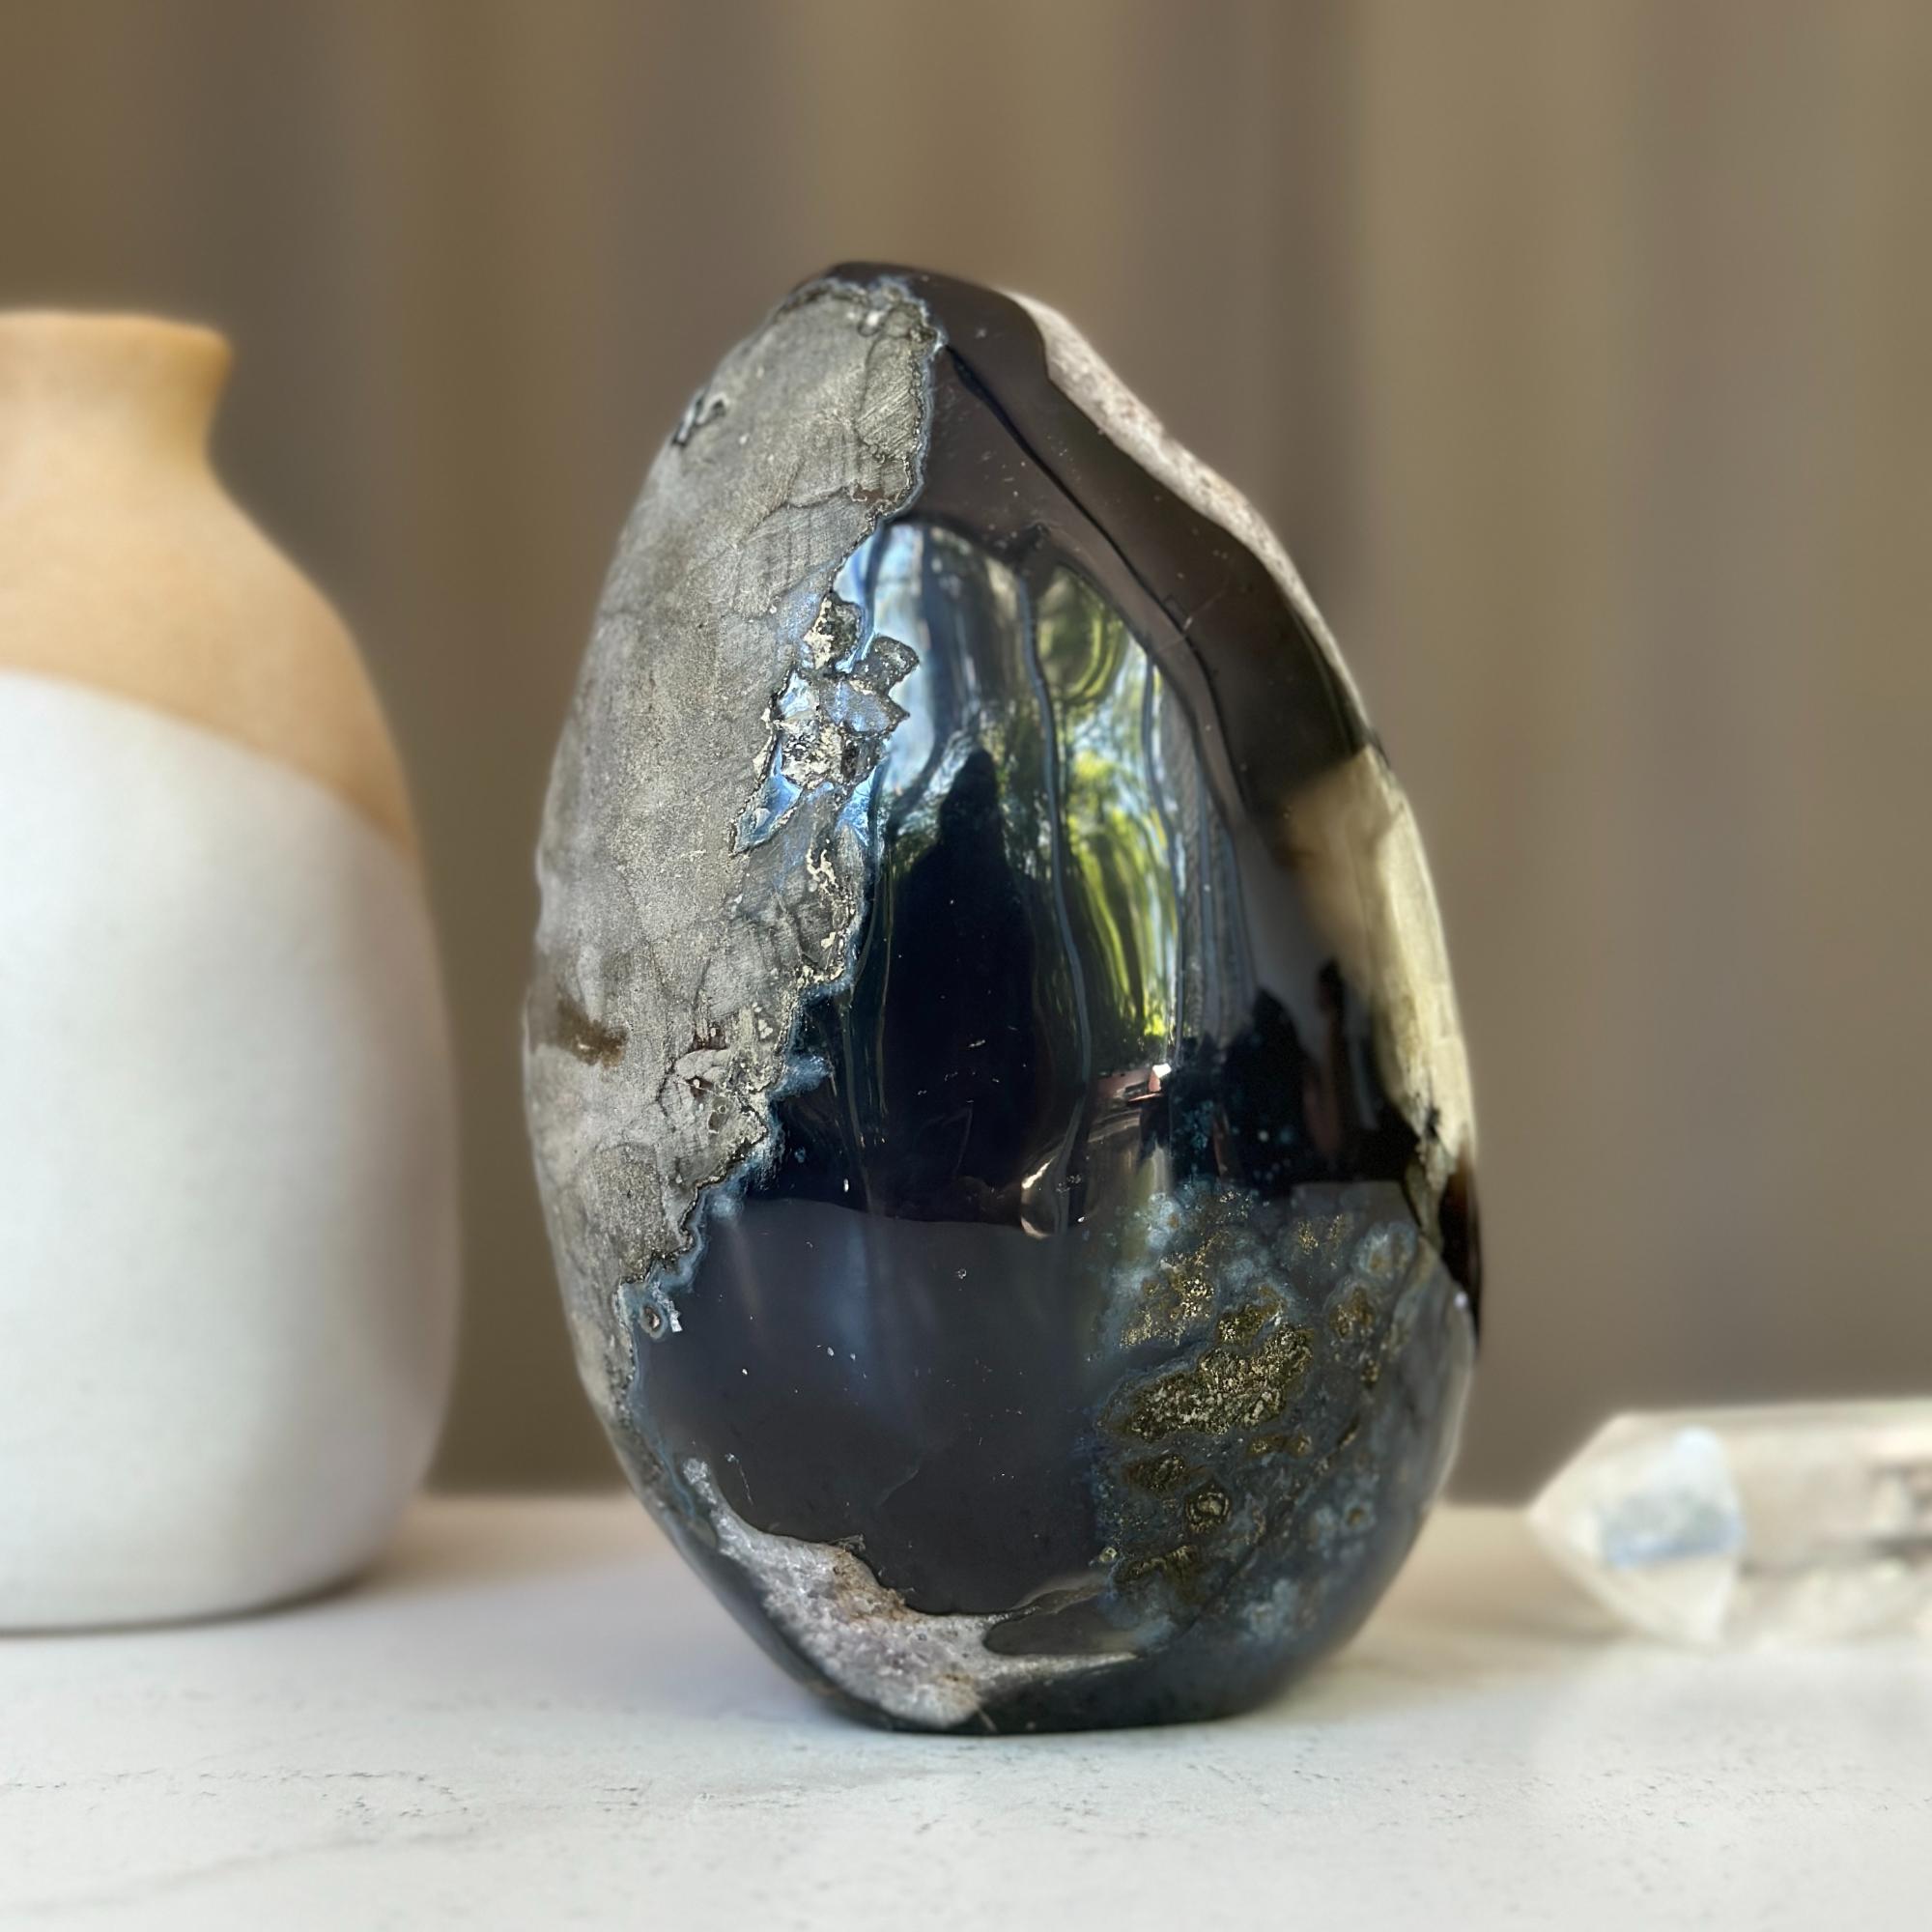 Incredible Crystal Amethyst and Agate Stone, Egg shaped crystal piece, AAA quality Oval Full polished Crystal, Unique Amethyst Cave